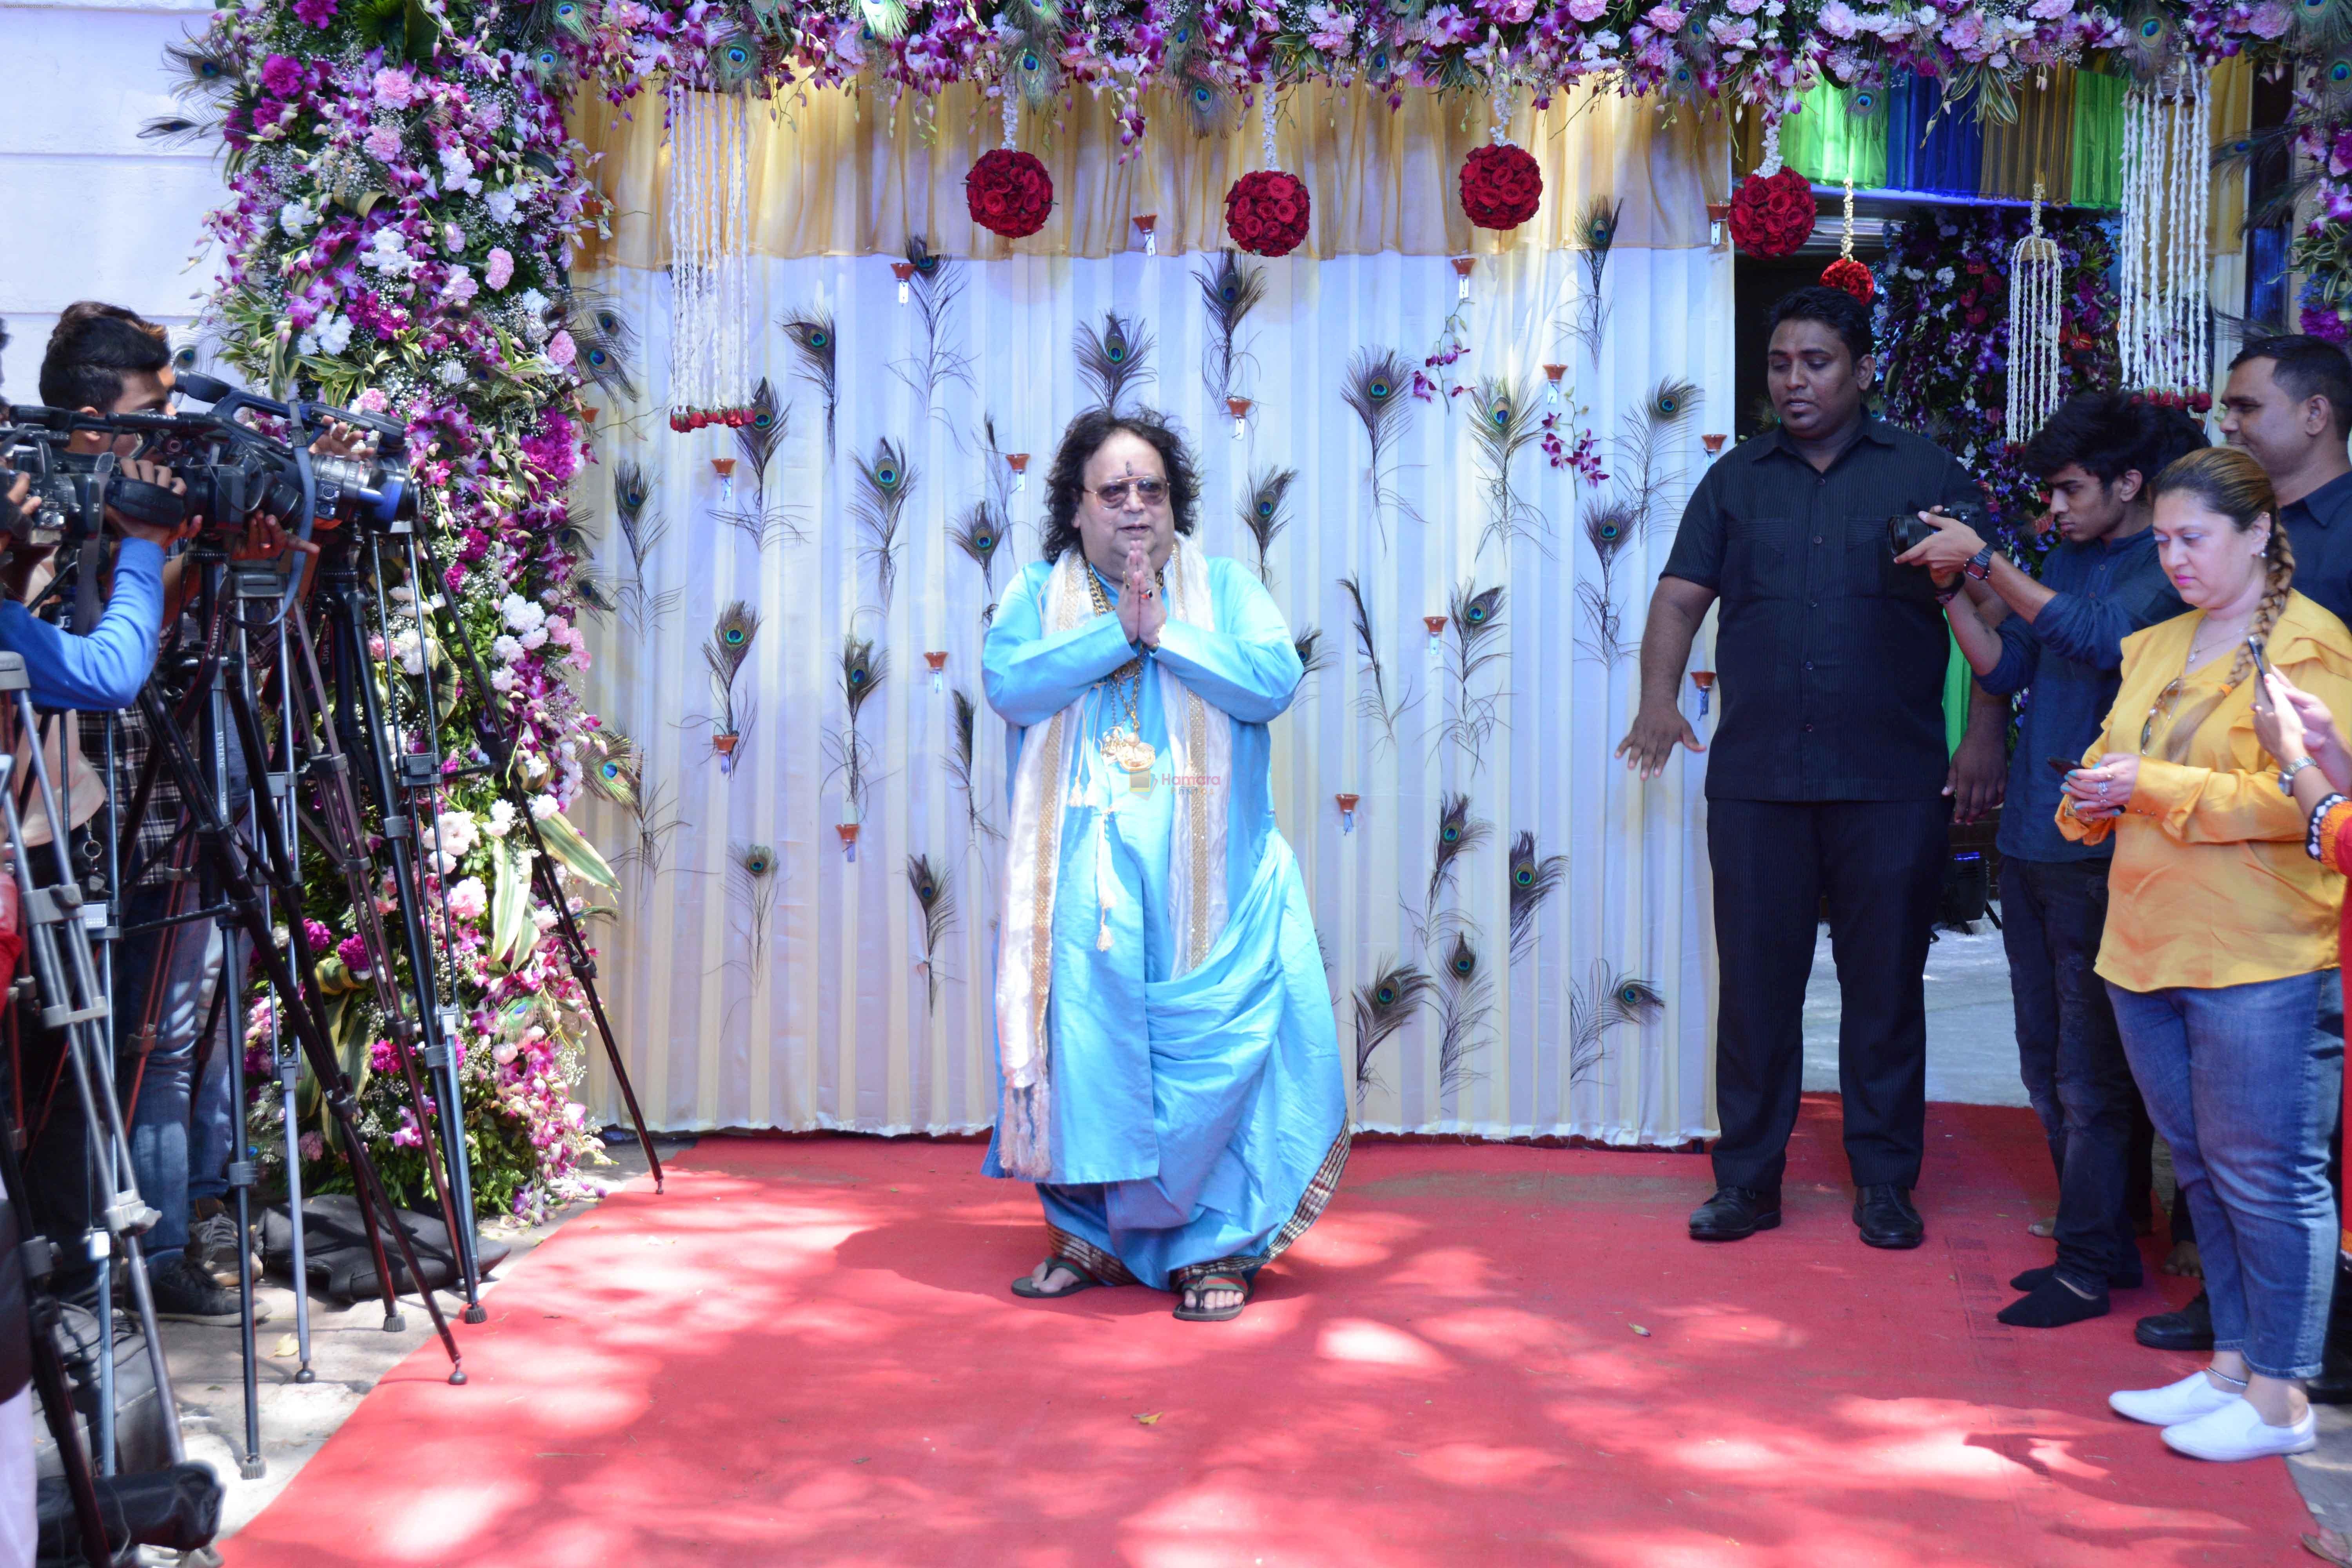 Bappi Lahiri at The auspicious occasion of Annaprasanna on 22nd March 2018